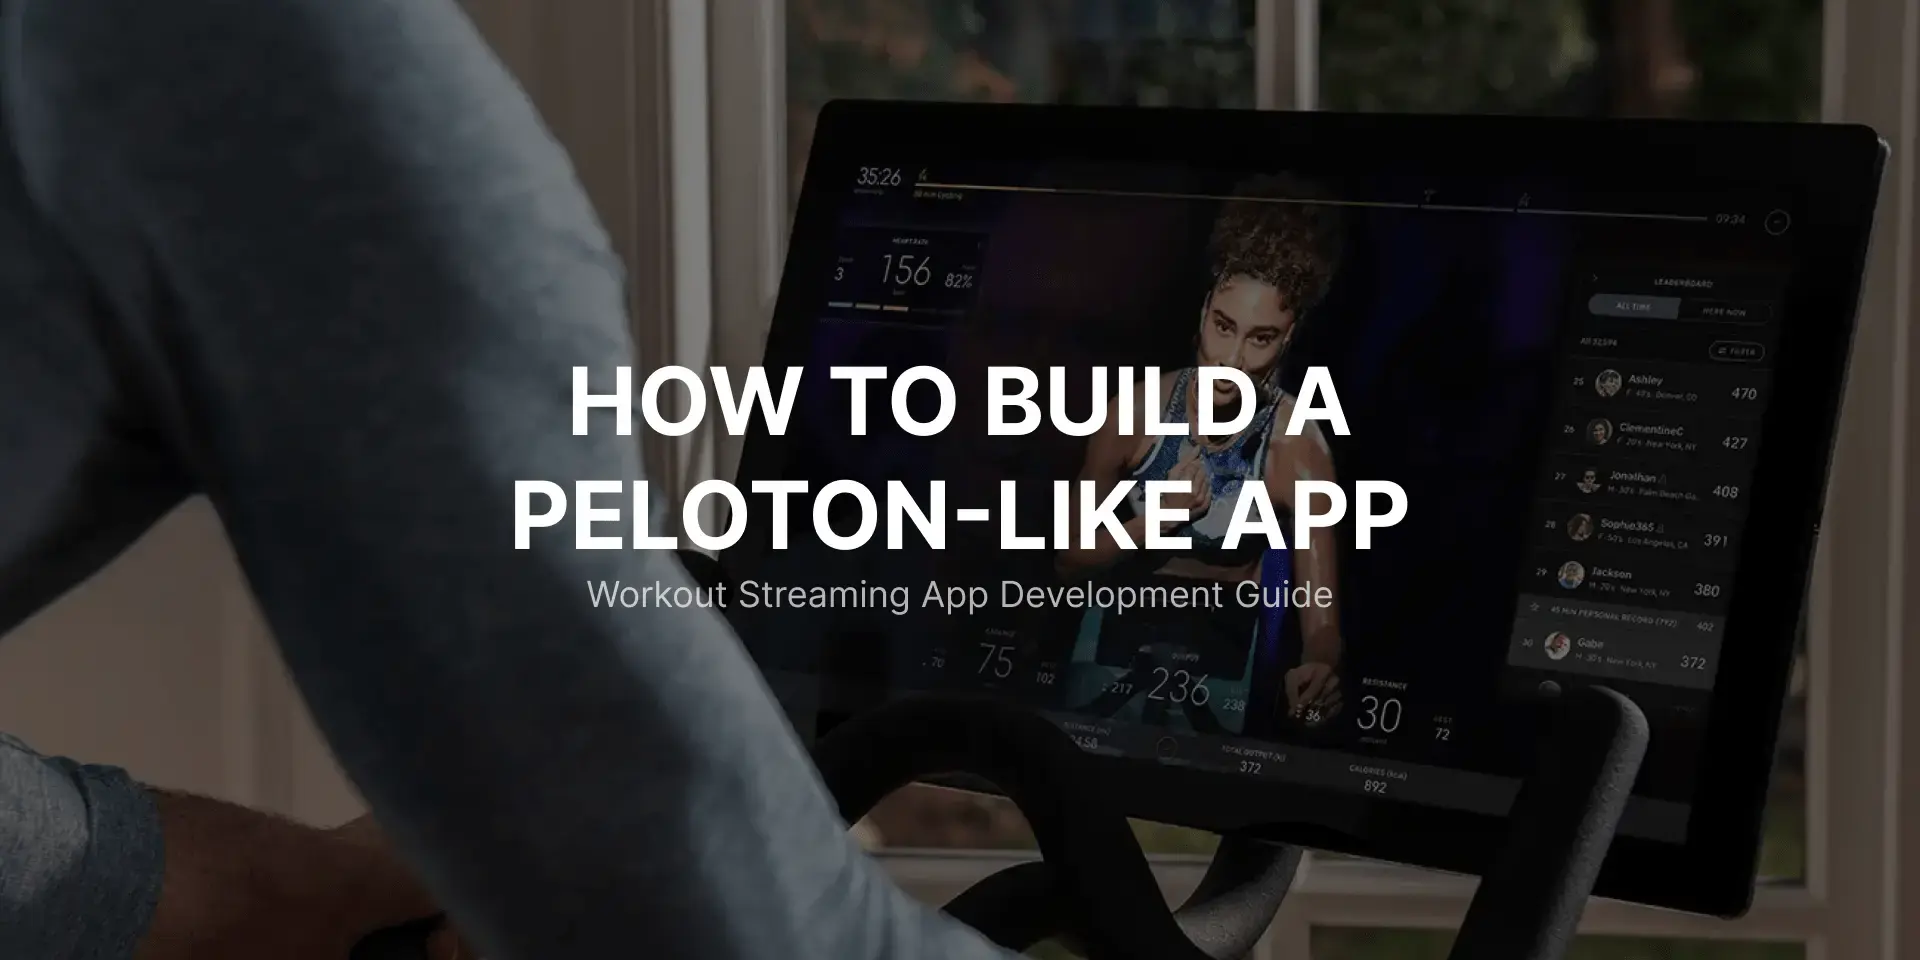 How to Build a Peloton-Like App: A Workout Streaming App Development Guide